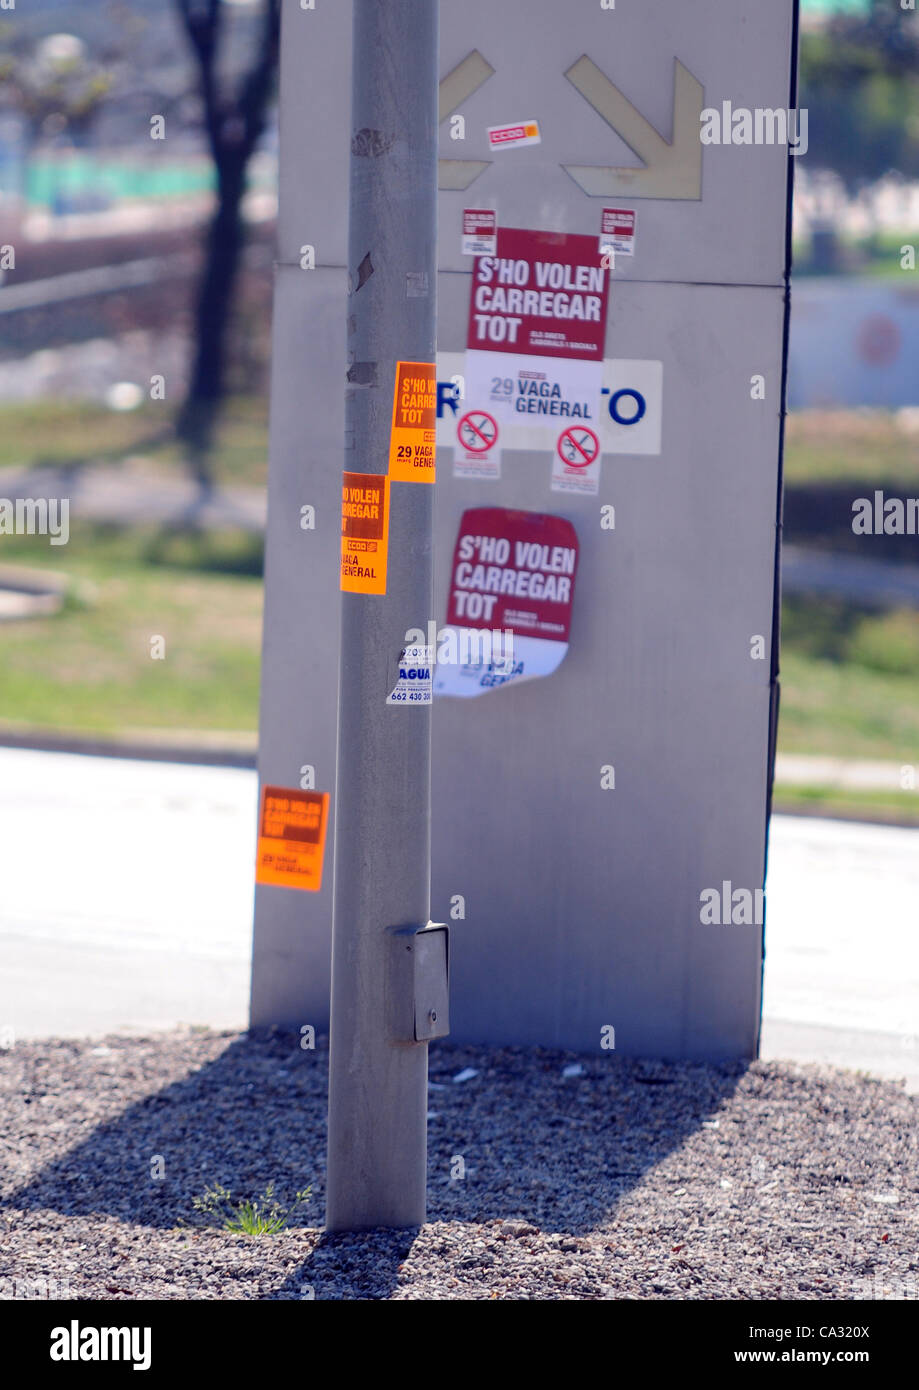 General Strike in Spain (March 29th, 2012).  Stickers with the legend in catalan 'S'ho volen carregar tot' (They want to get rid of everything, in reference to the restriction of social gains achieved by the workers) anywhere where they could be sticked. Stock Photo